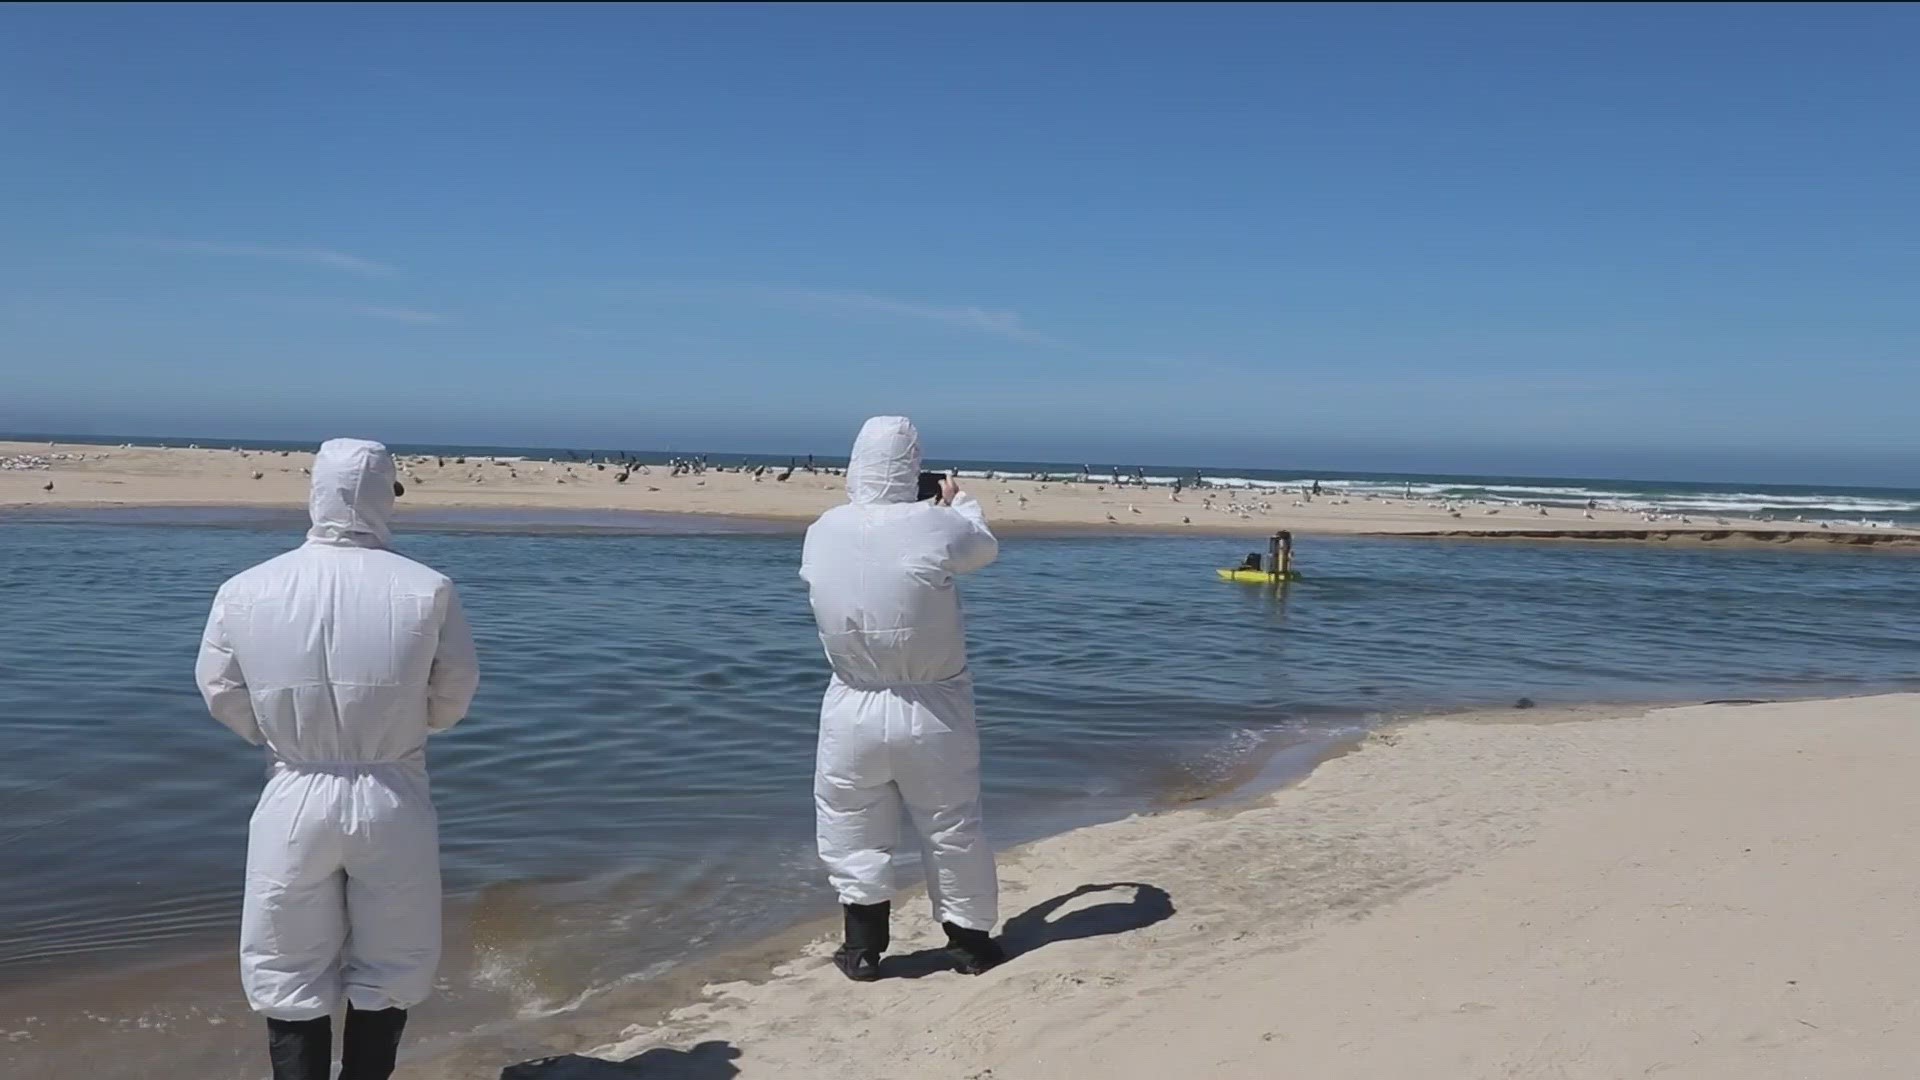 For the first time, an ROV or Remotely Operated Vehicle is testing the water clarity at the Tijuana River outlet in Imperial Beach.